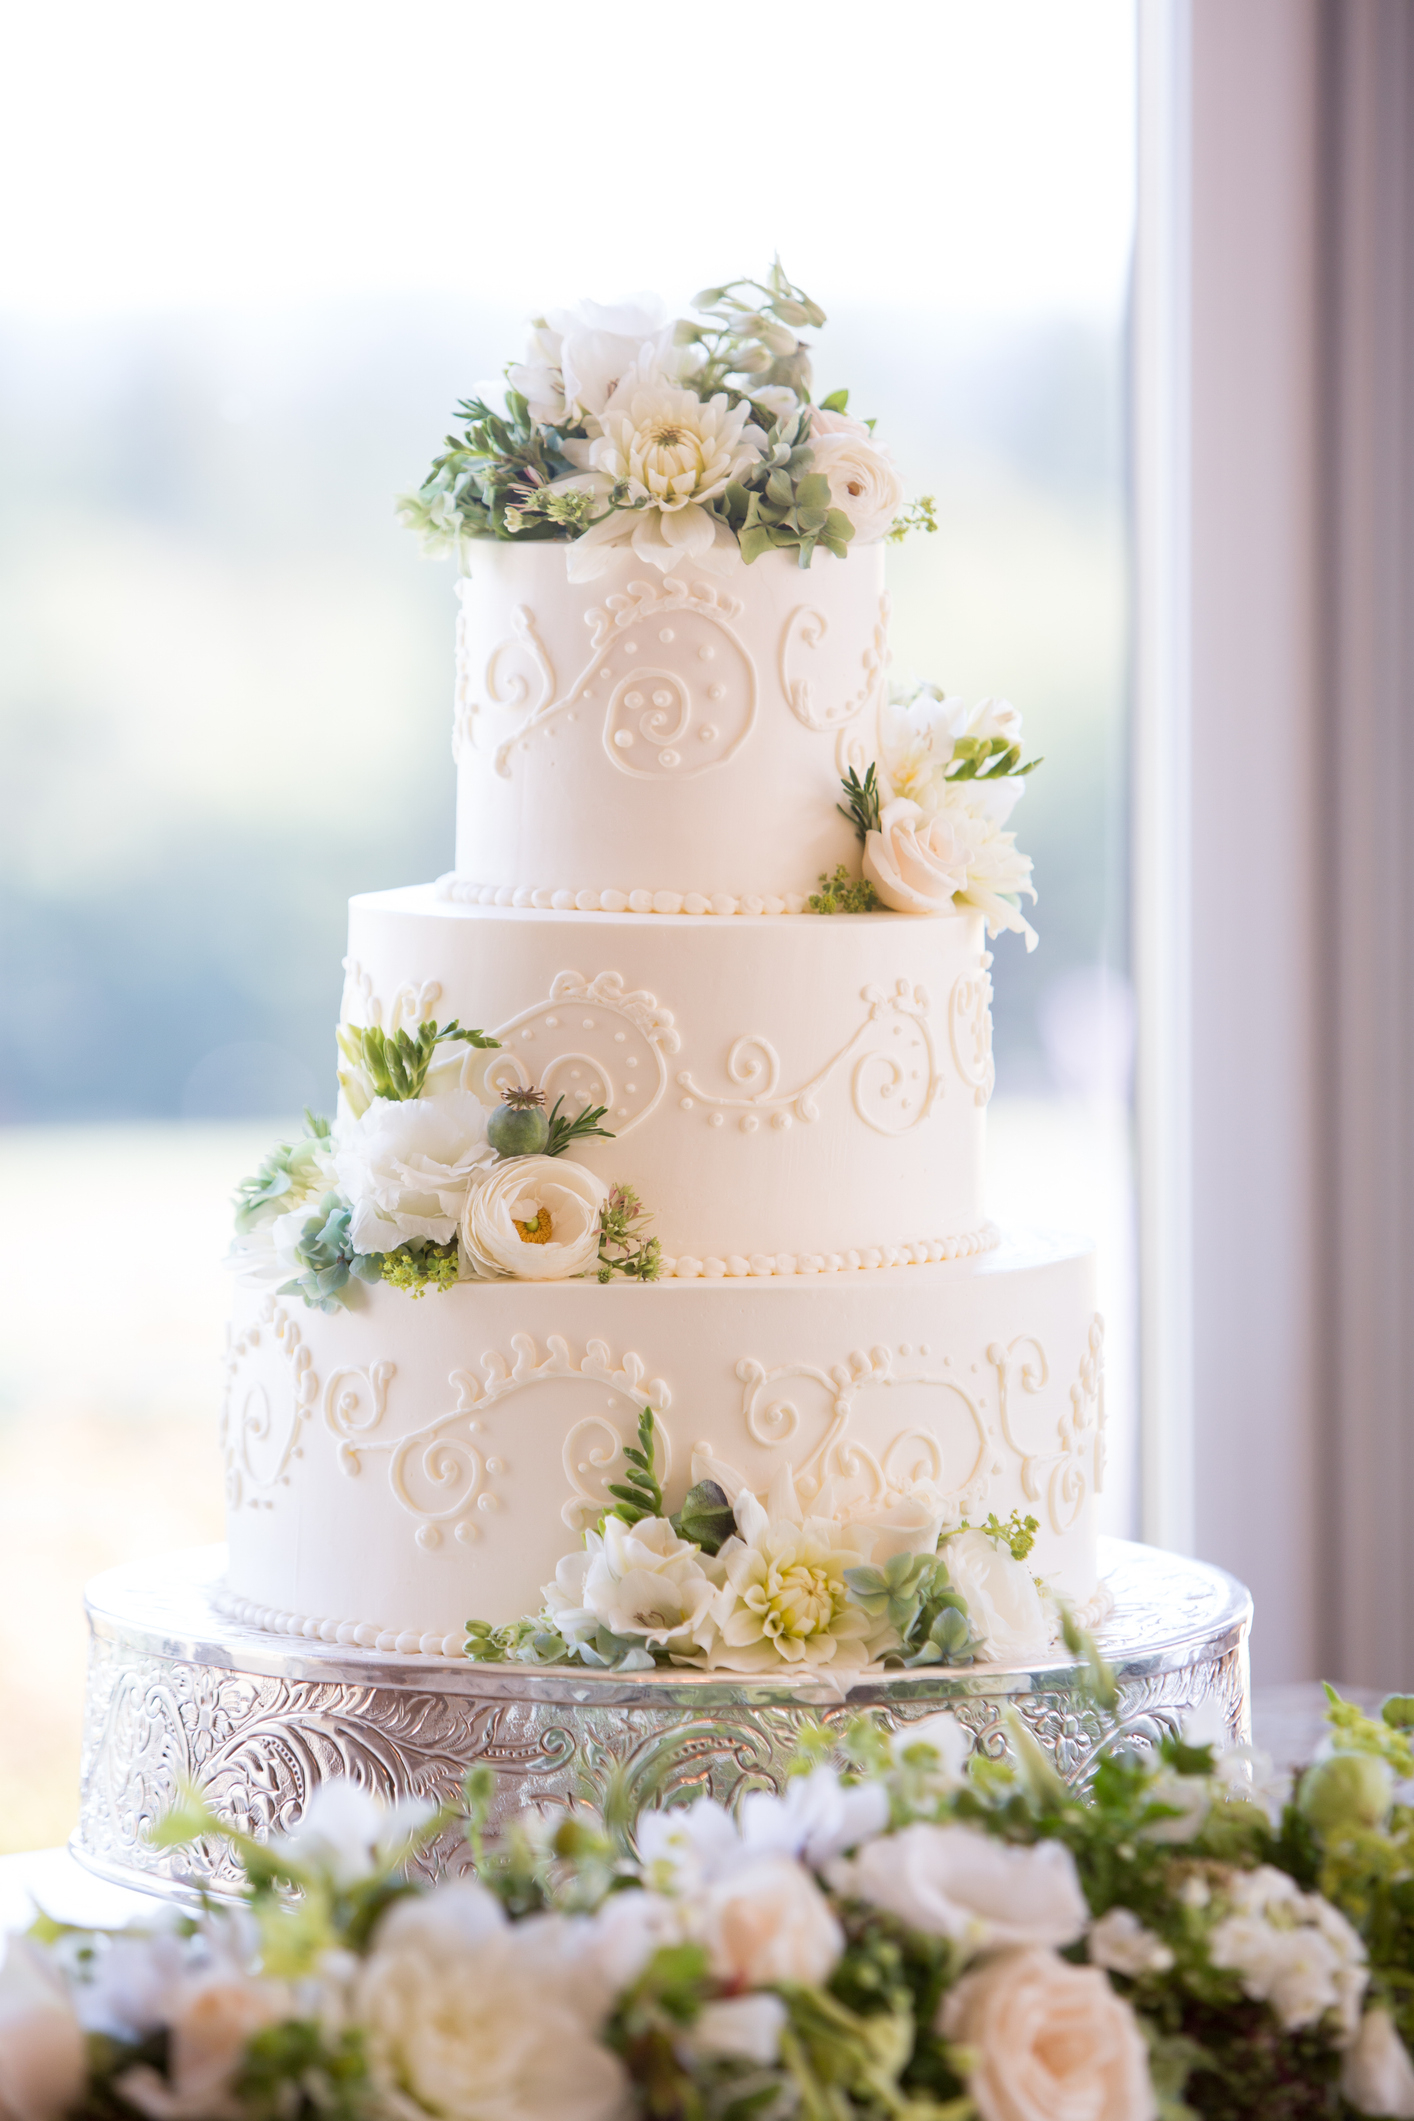 Three-tiered wedding cake with white icing and floral decorations